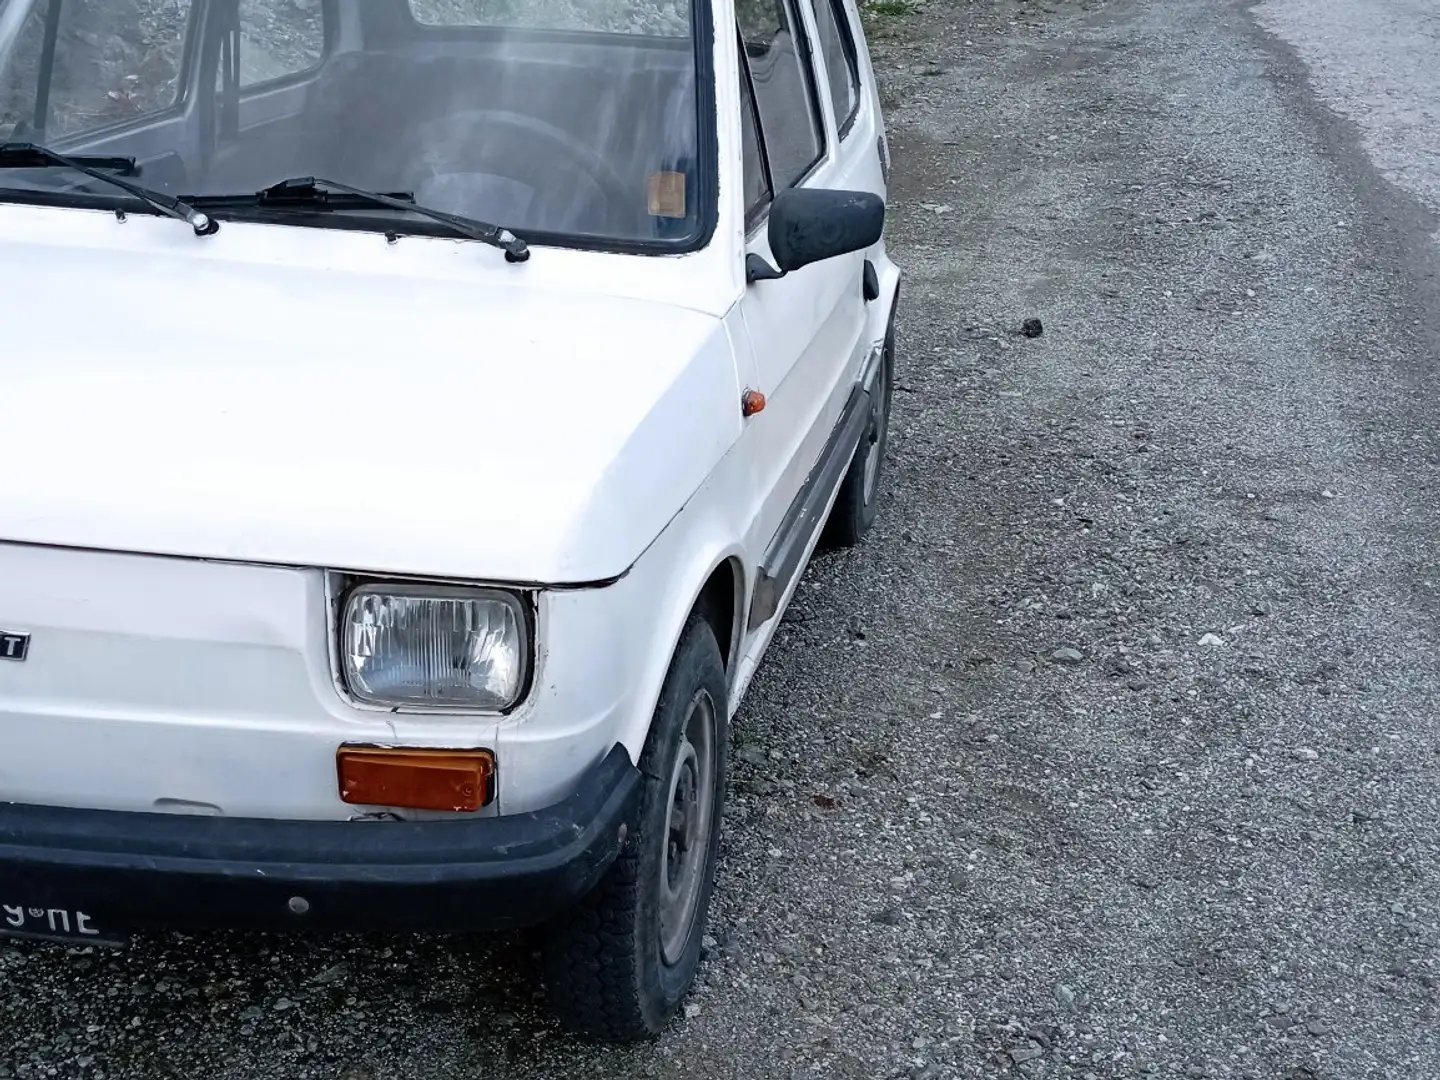 Fiat 126 650 Personal 4 Wit - 1